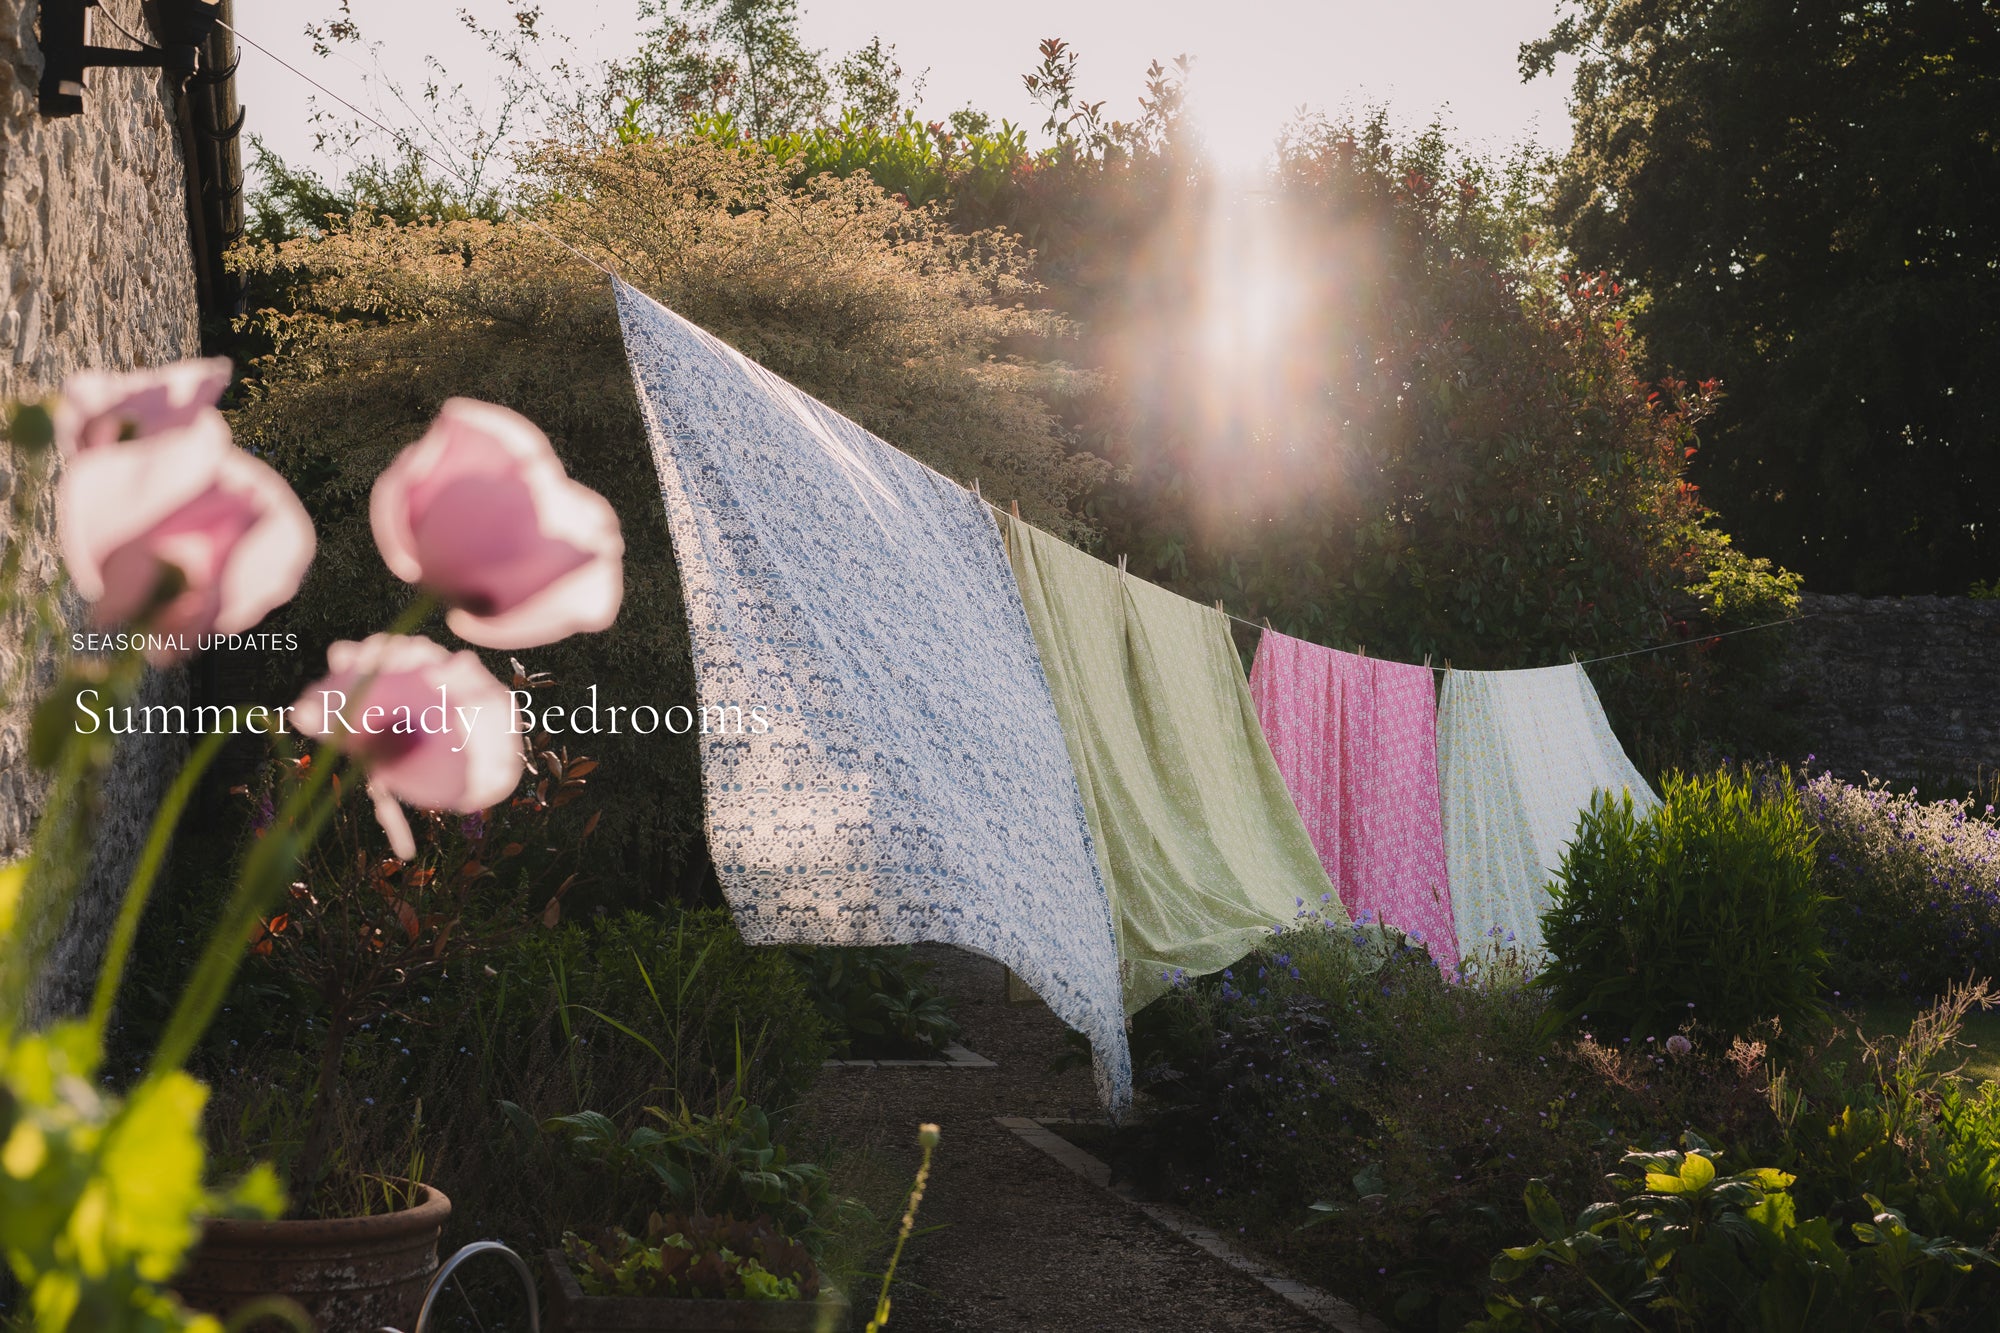 summer ready bedroom image of duvets hanging on a washing line in a sunshine flooded garden